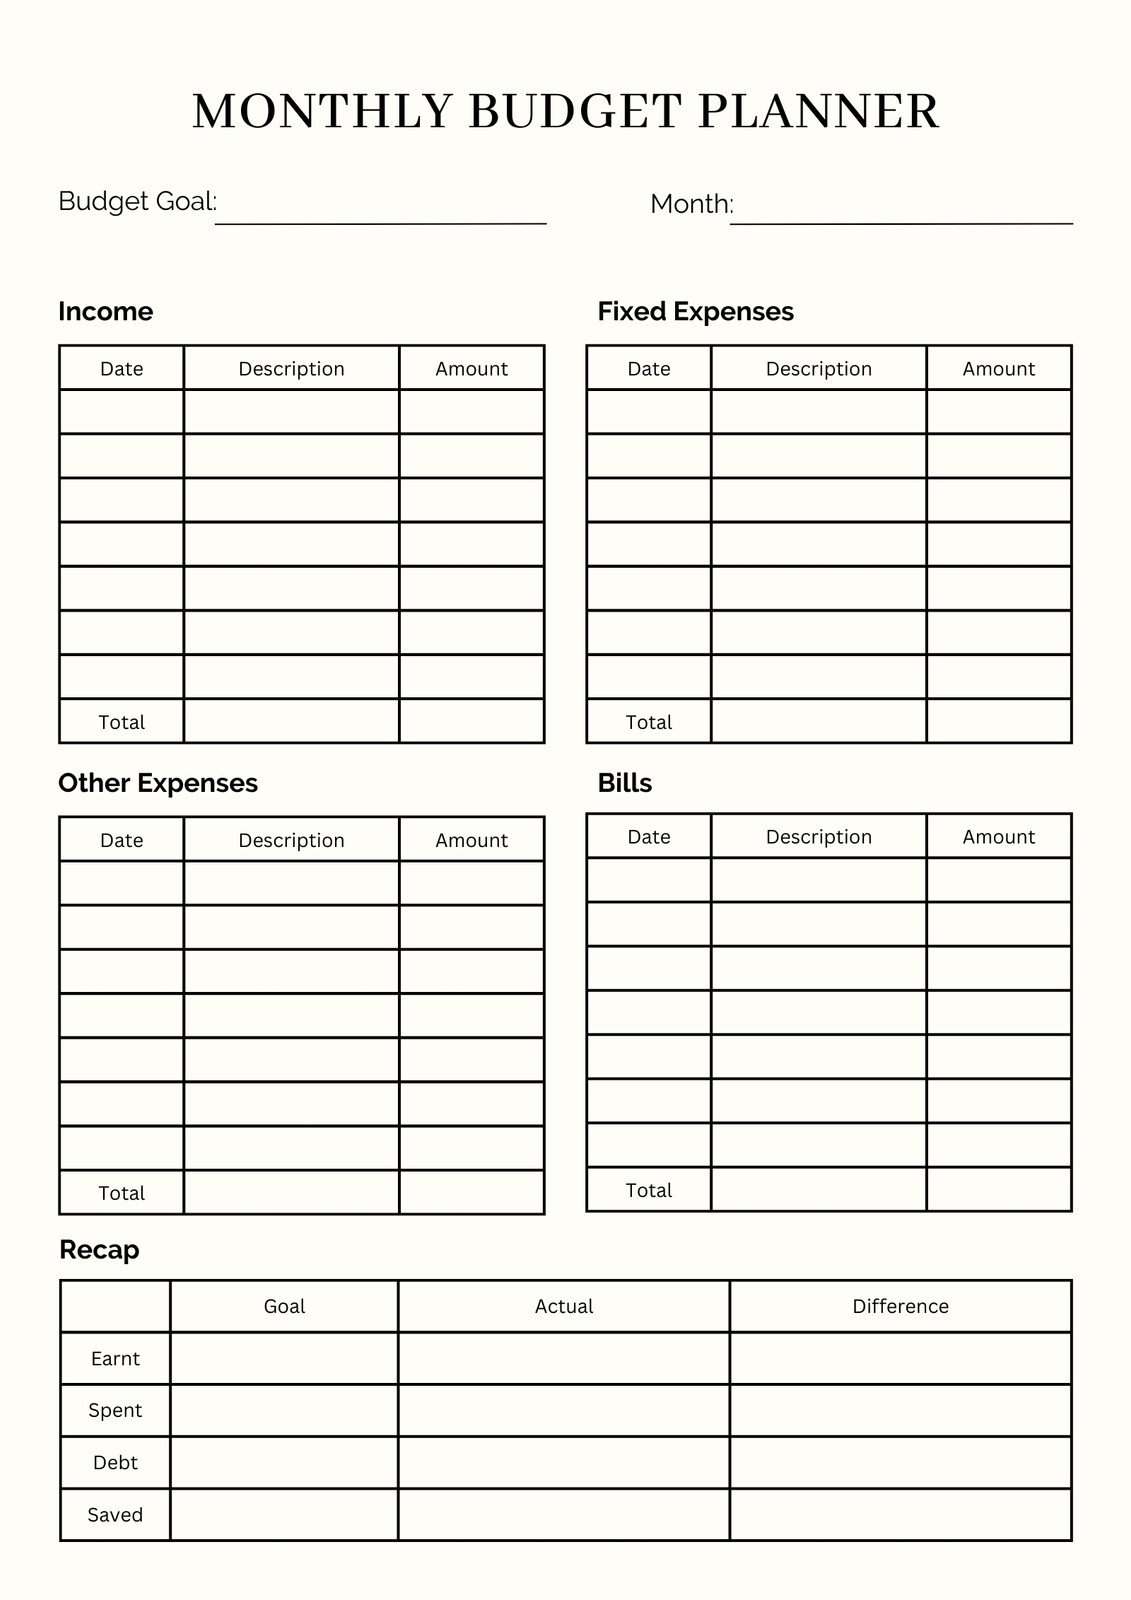 Free And Customizable Budget Templates throughout Free Printable Home Budget Planner